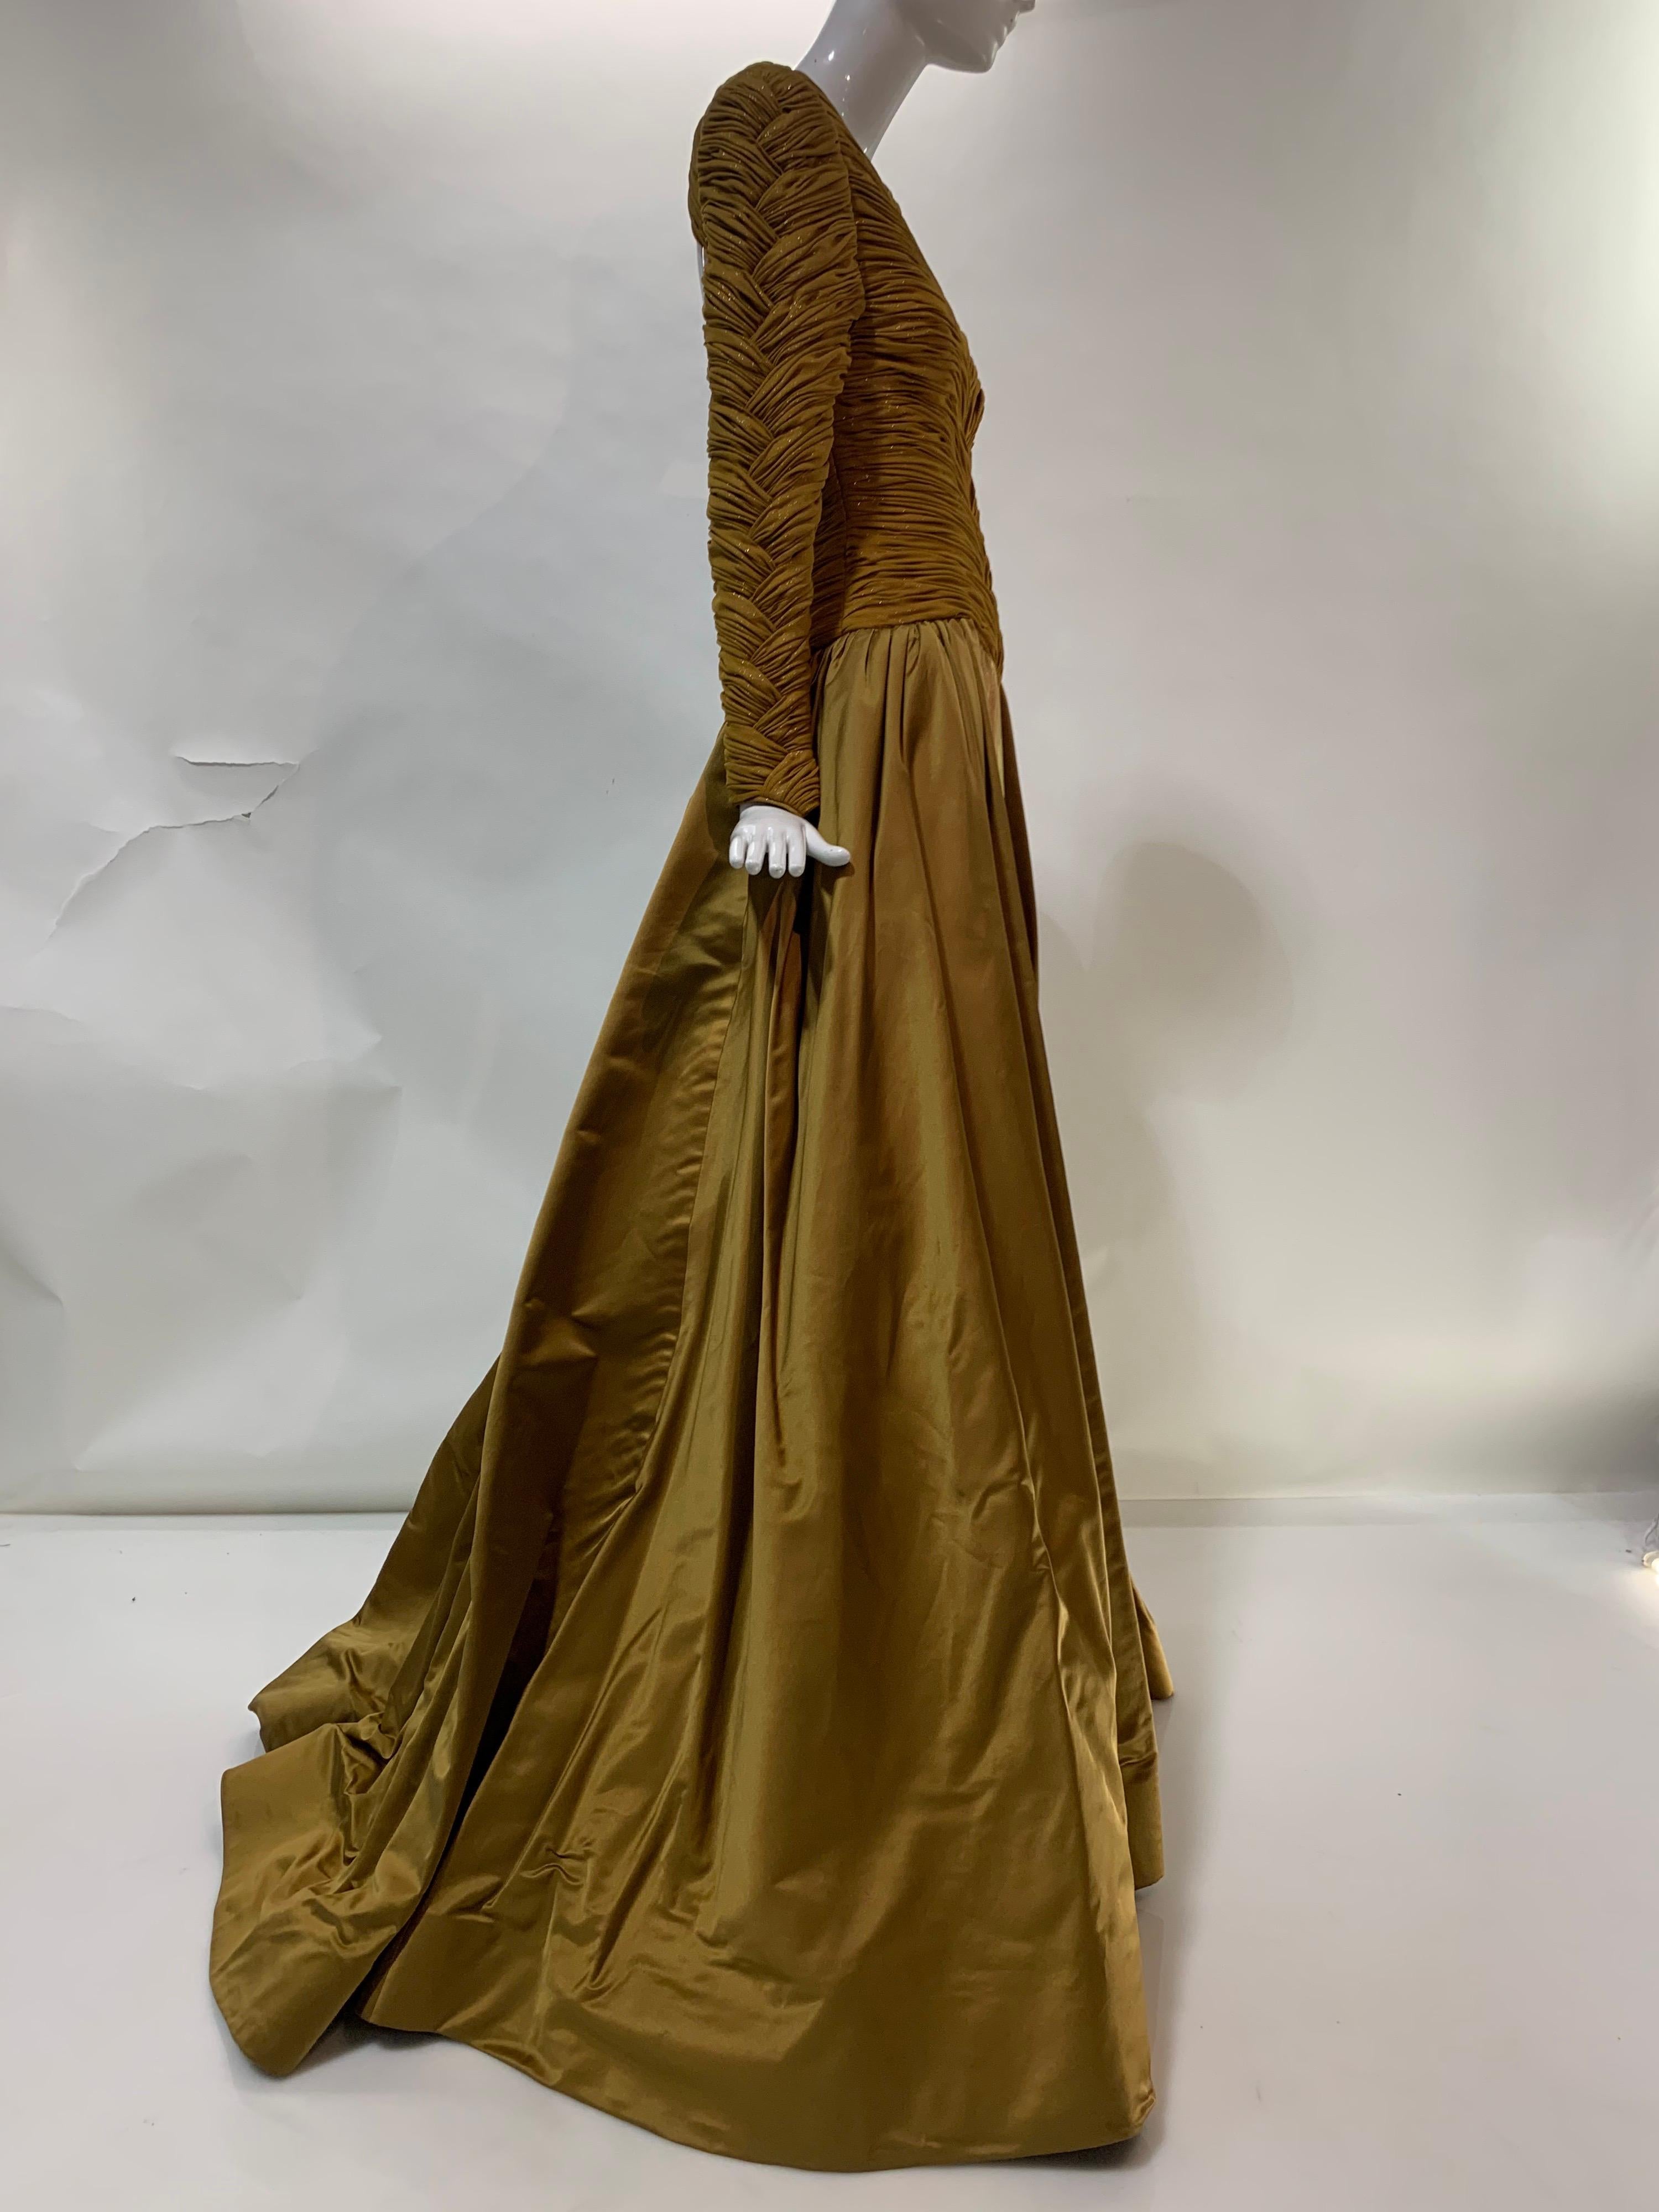 1990s Demi-Couture Gold Silk Ball Gown w/ Velvet Sheath & Dramatic Satin Skirt  For Sale 2